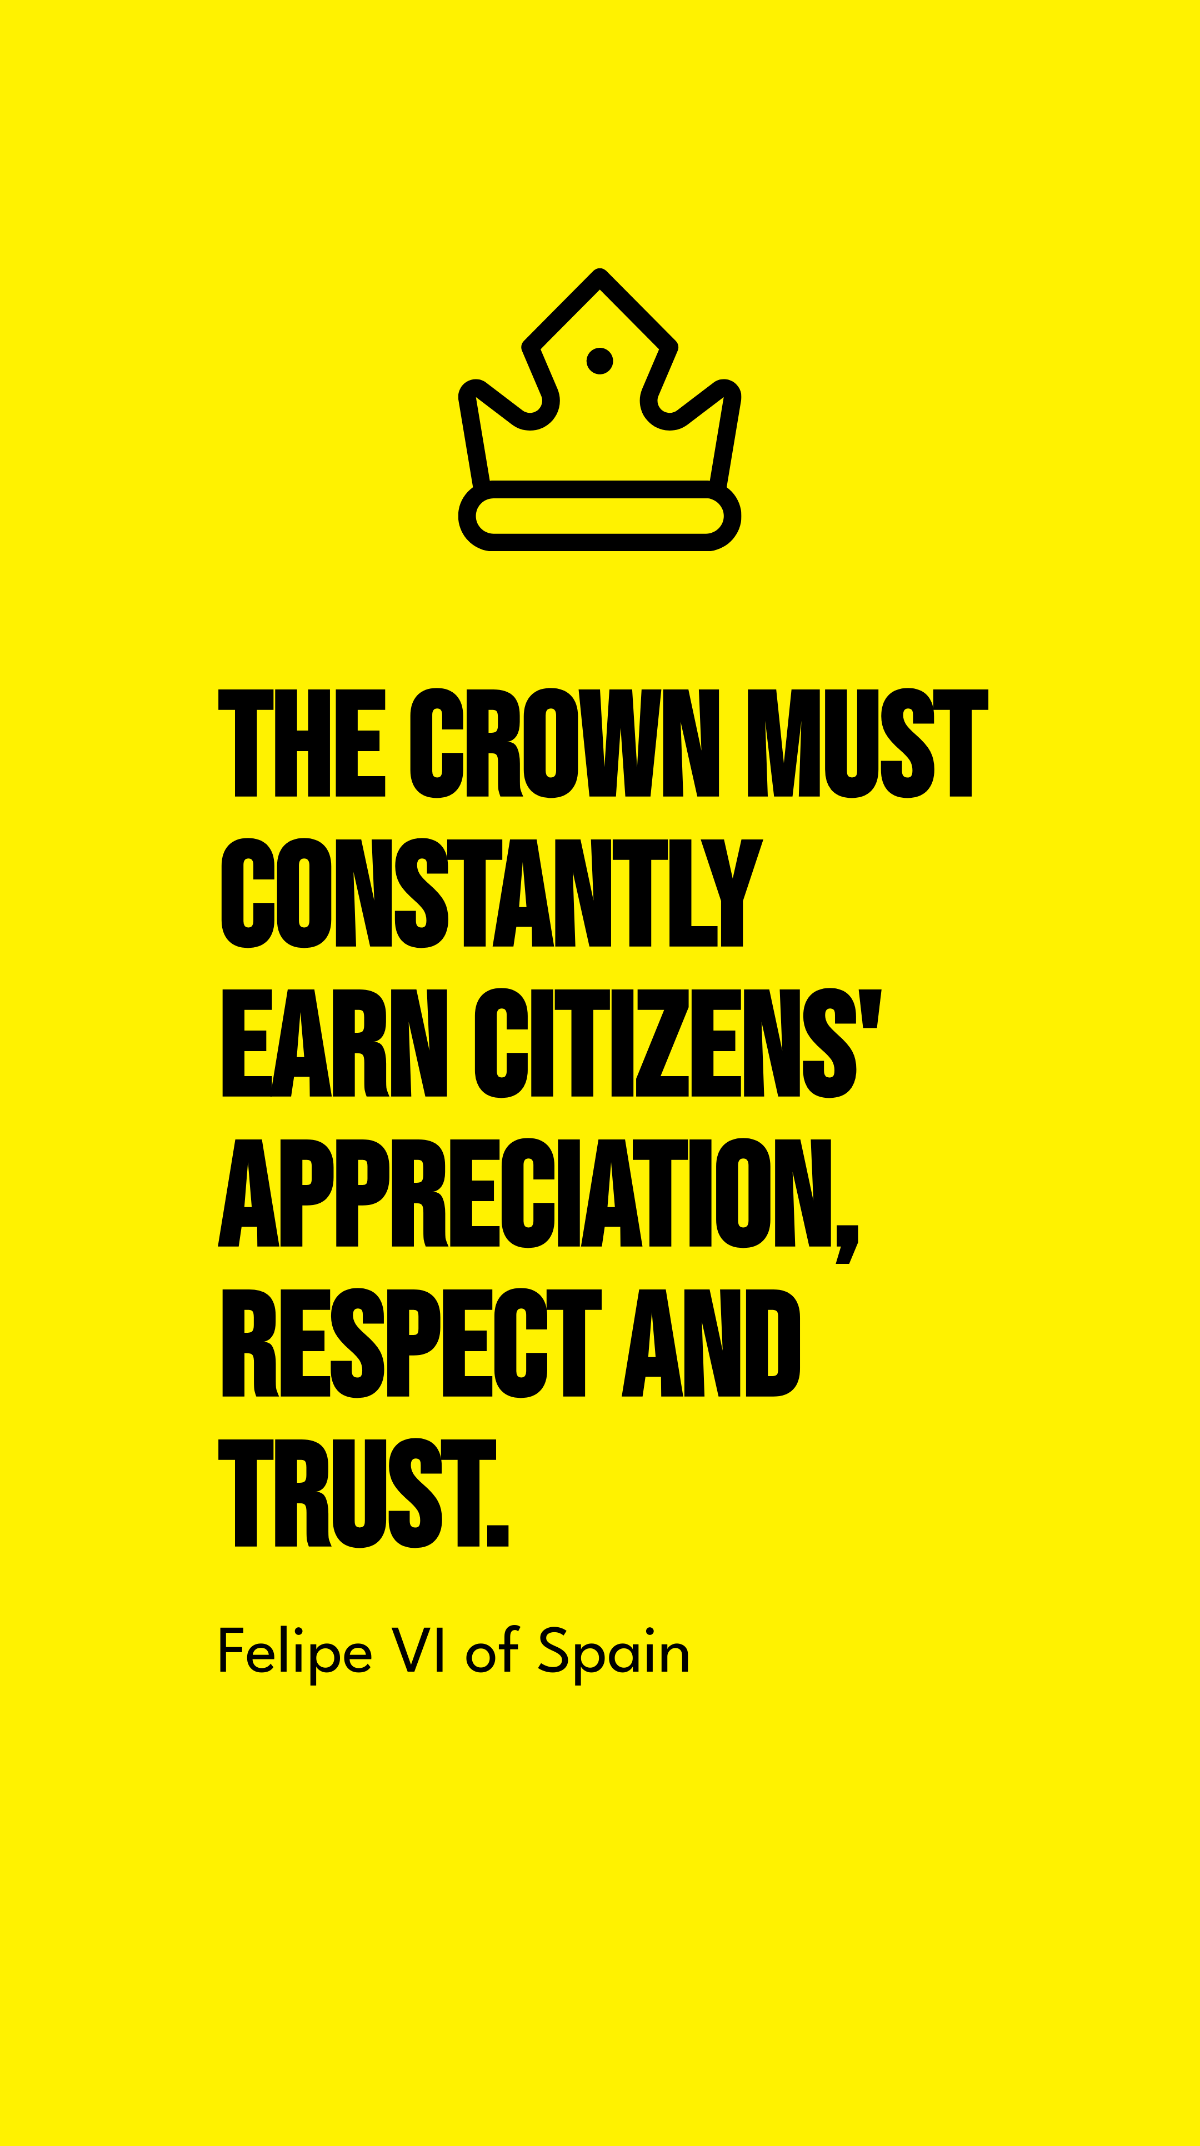 Felipe VI of Spain - The crown must constantly earn citizens' appreciation, respect and trust.